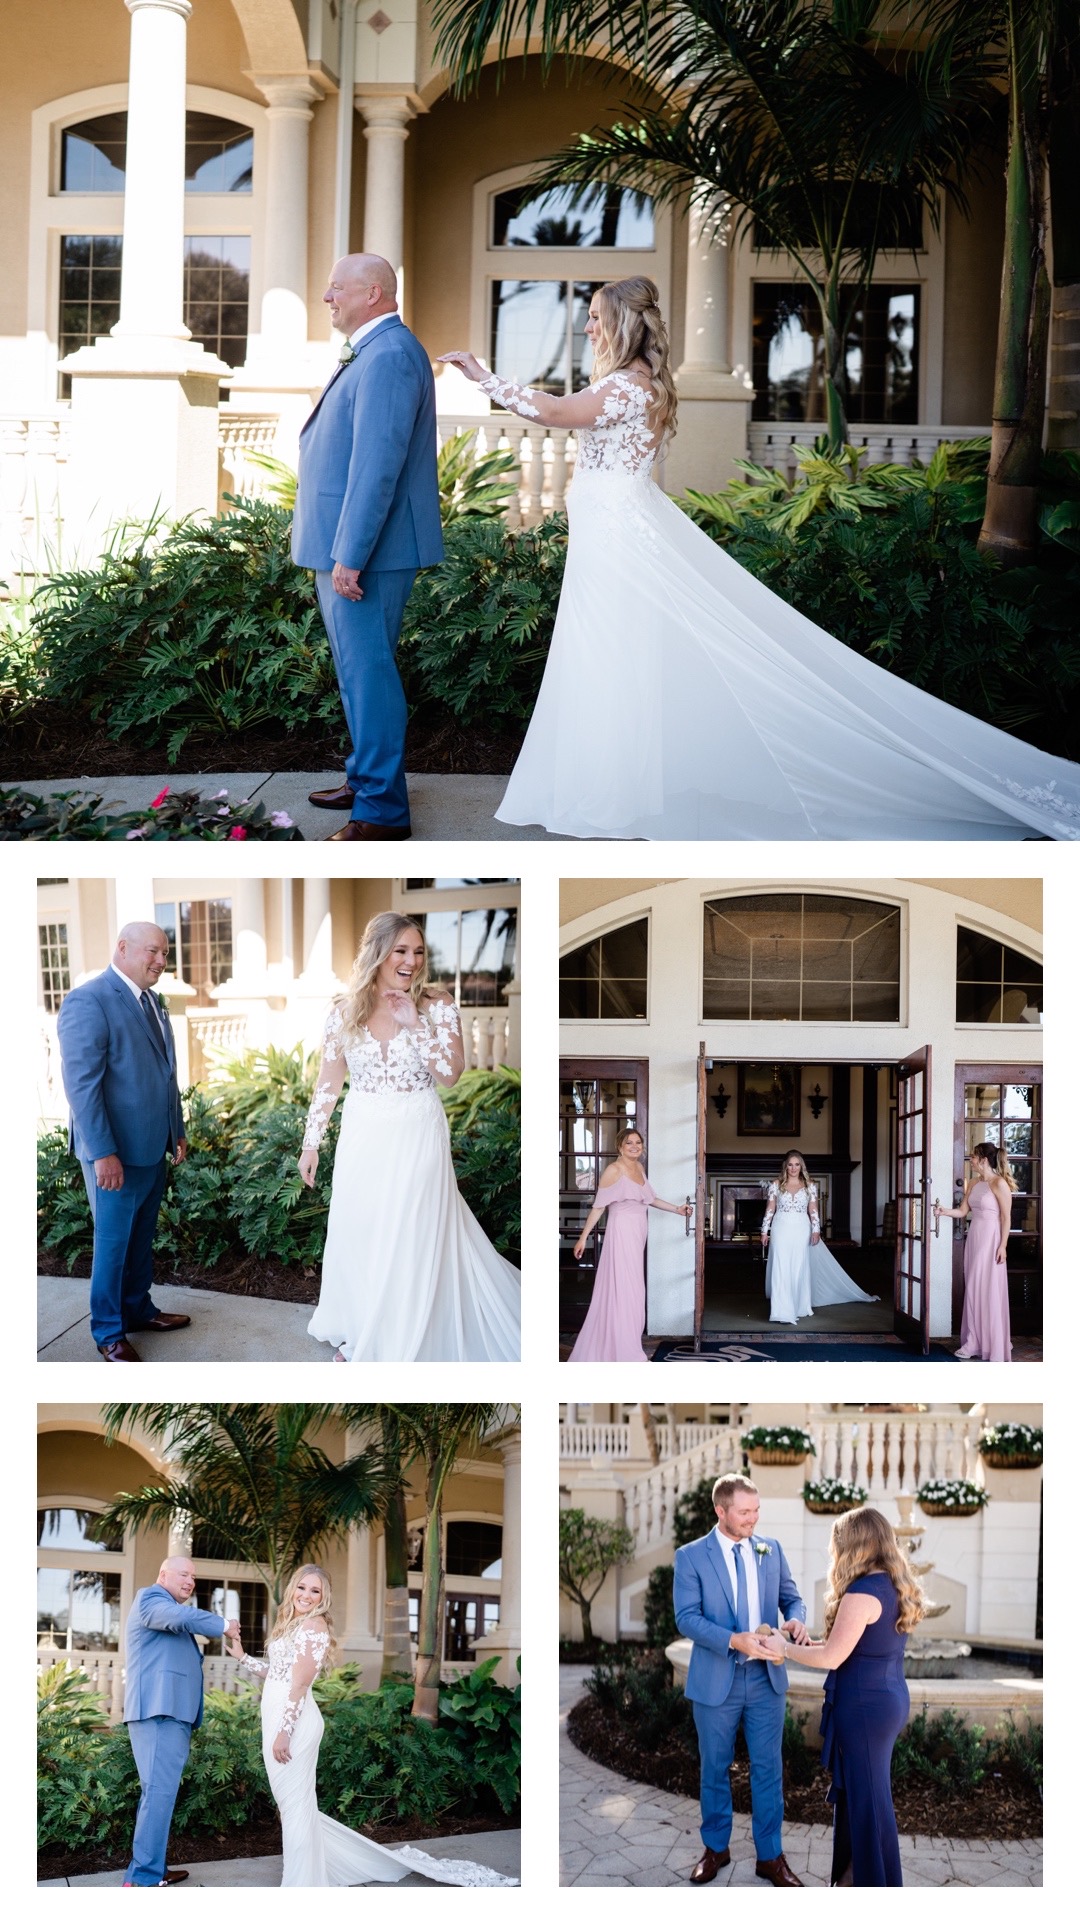 Florida bride shares first look with her father and Florida groom shares first look with his mother